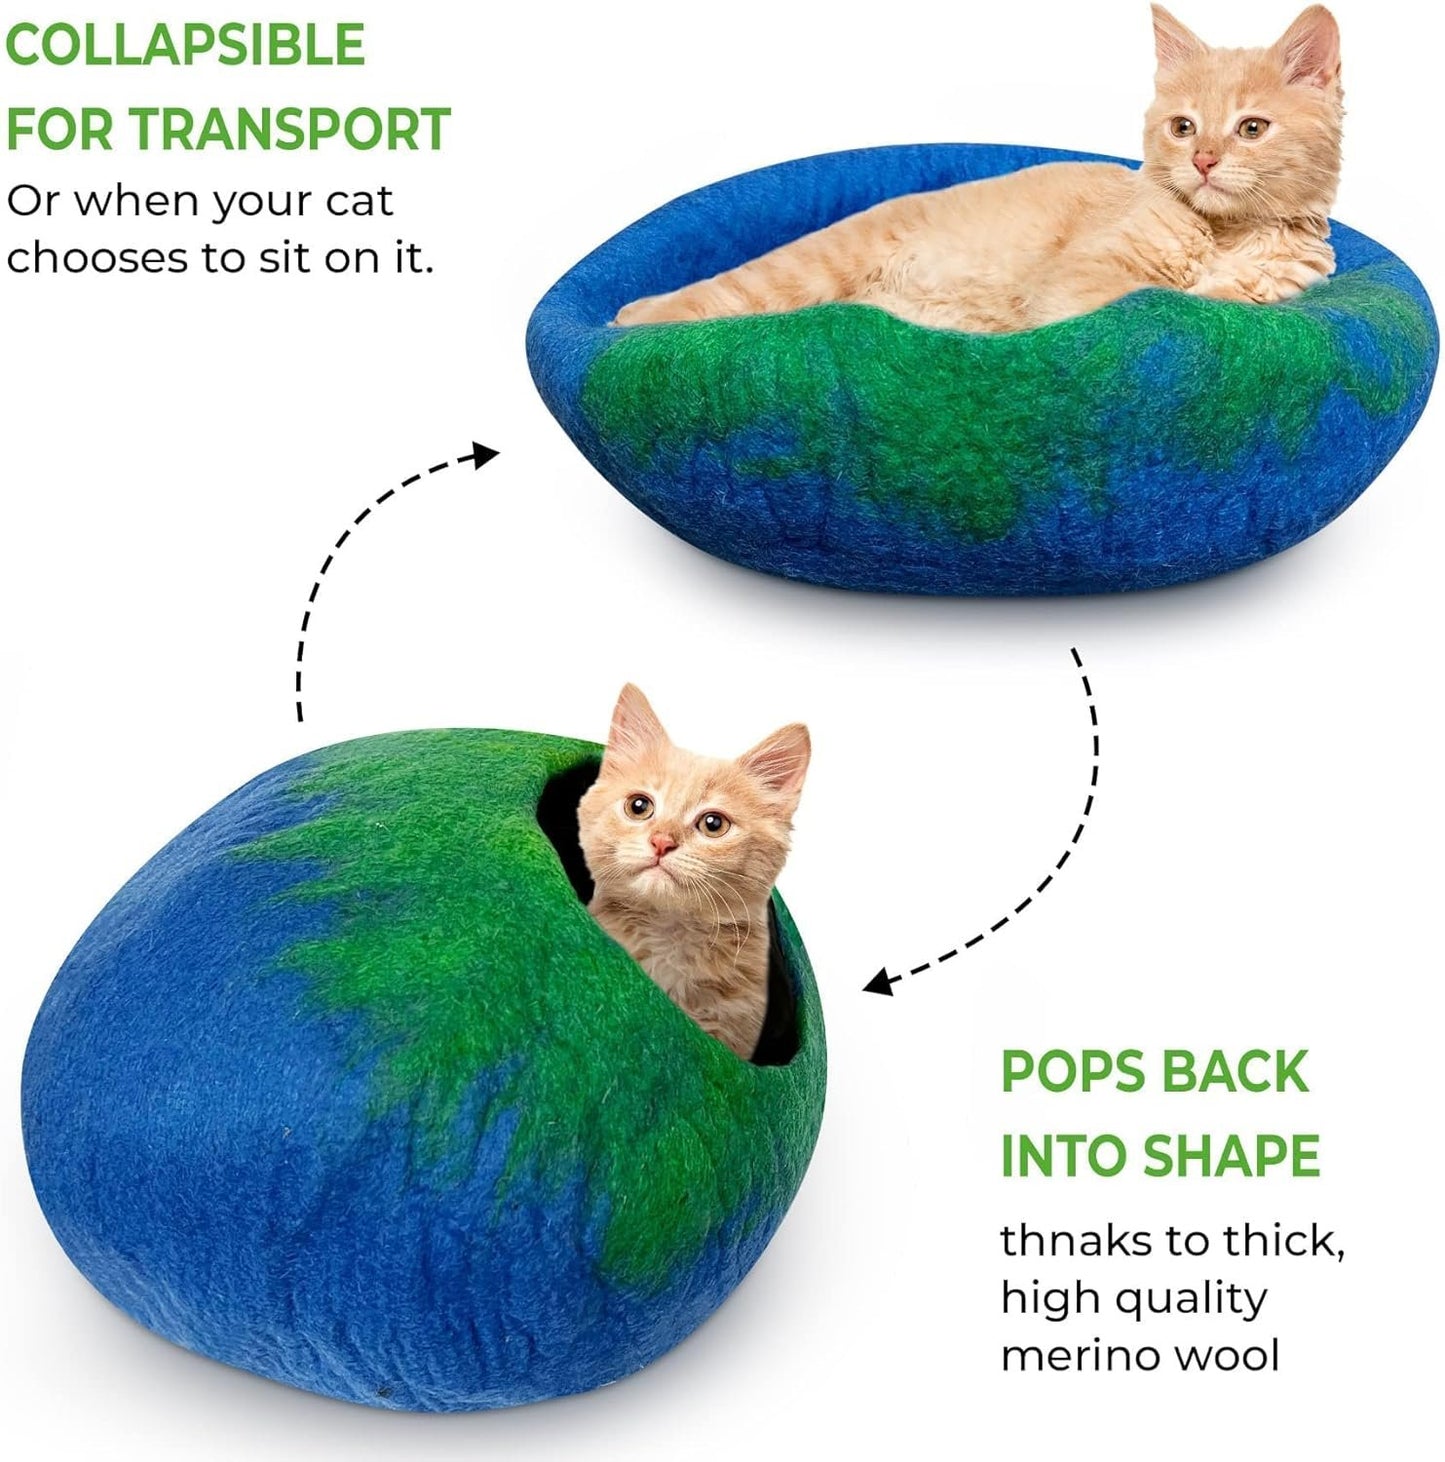 Handmade Wool Cat Cave Bed – Cozy Felt Cat House for Pets – Eco-Friendly Kitty Hideaway